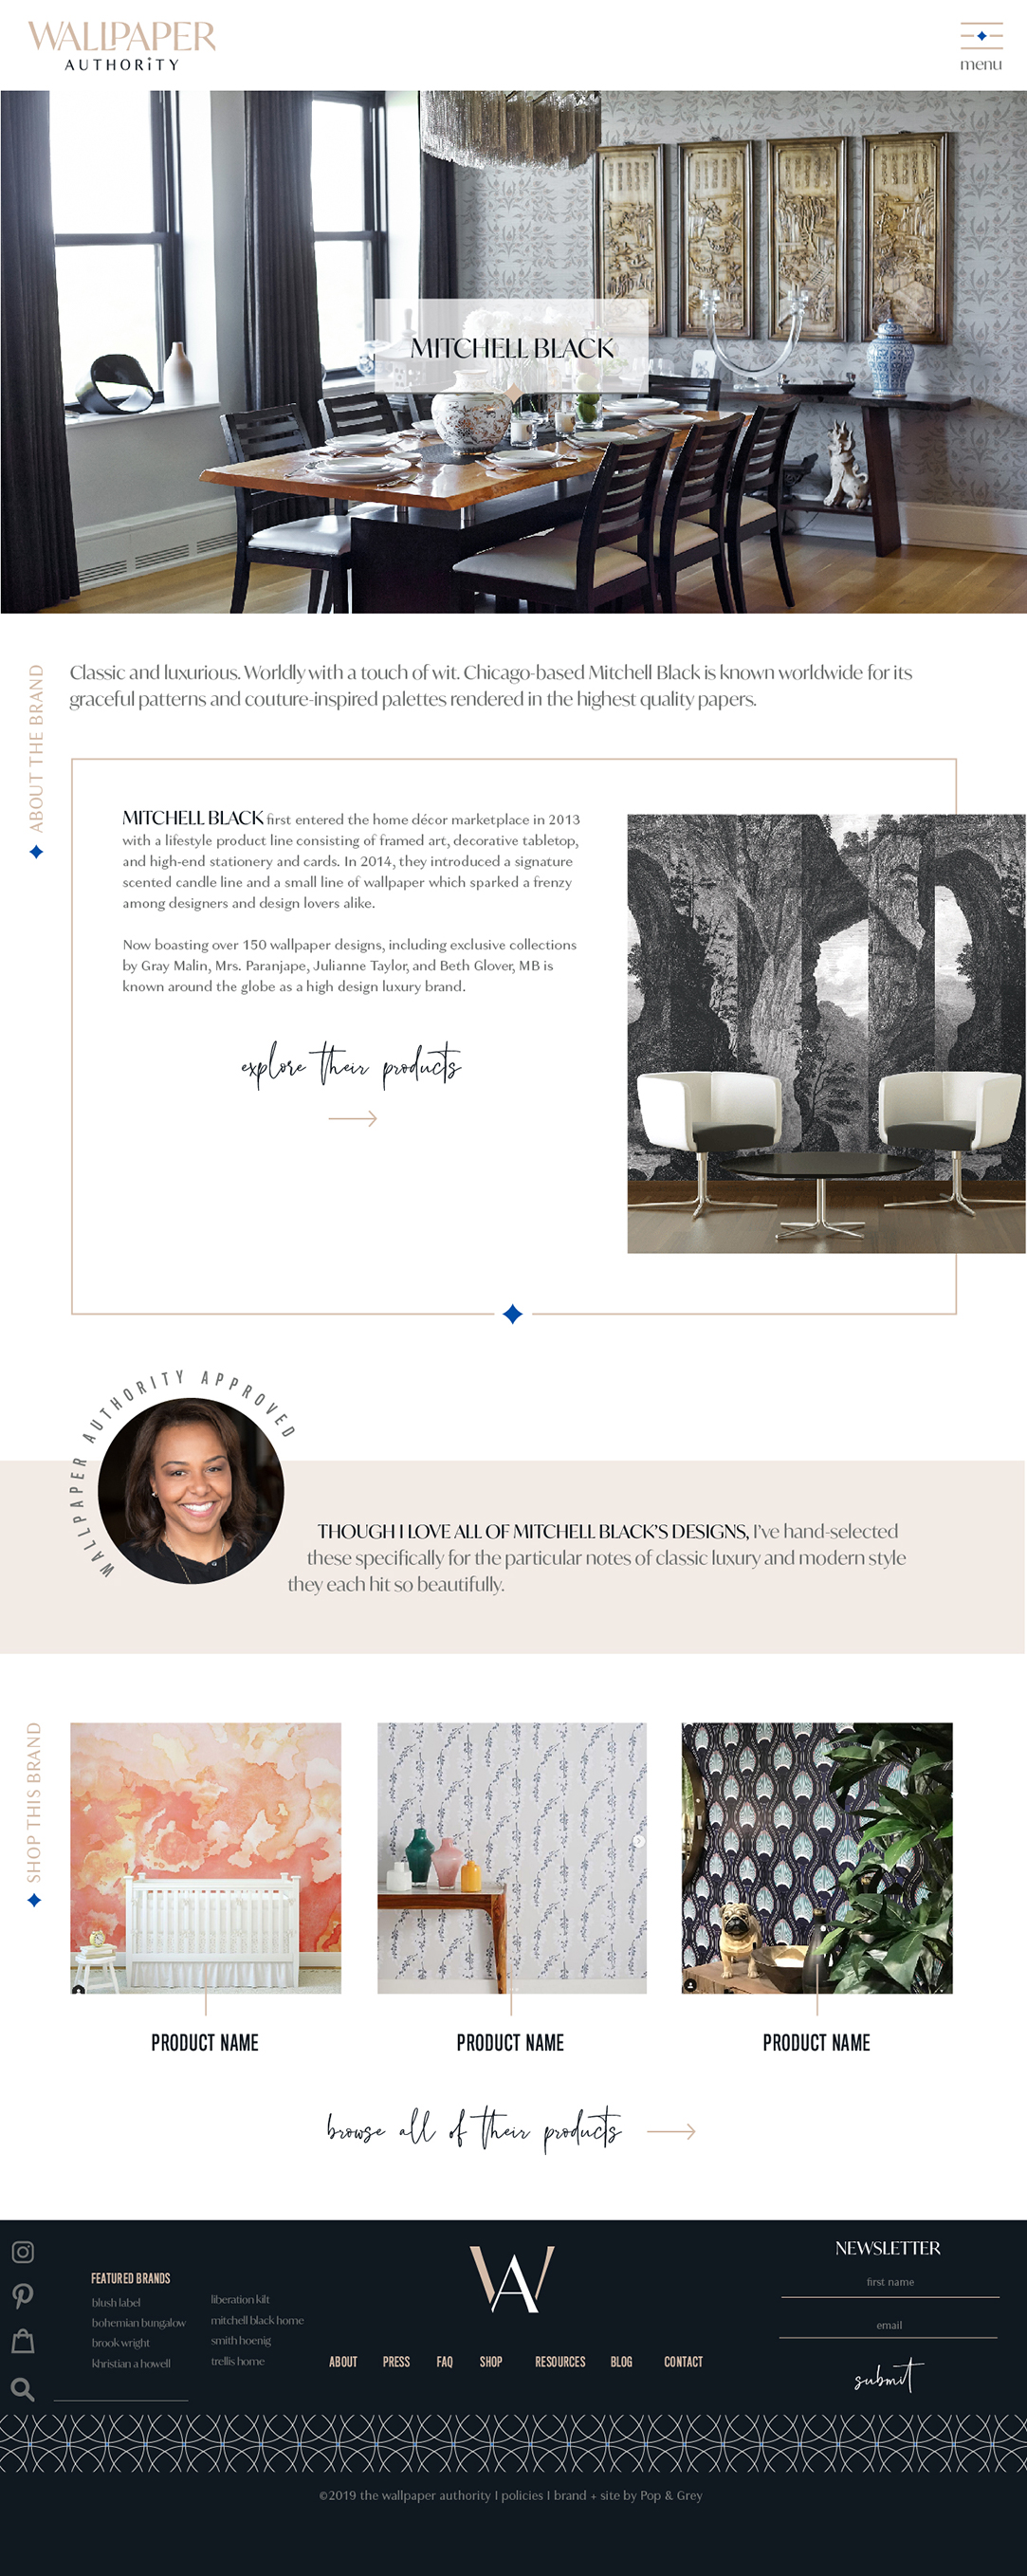 the wallpaper authority by lynai jones of mitchell black. e-commerce website and brand design by pop & grey